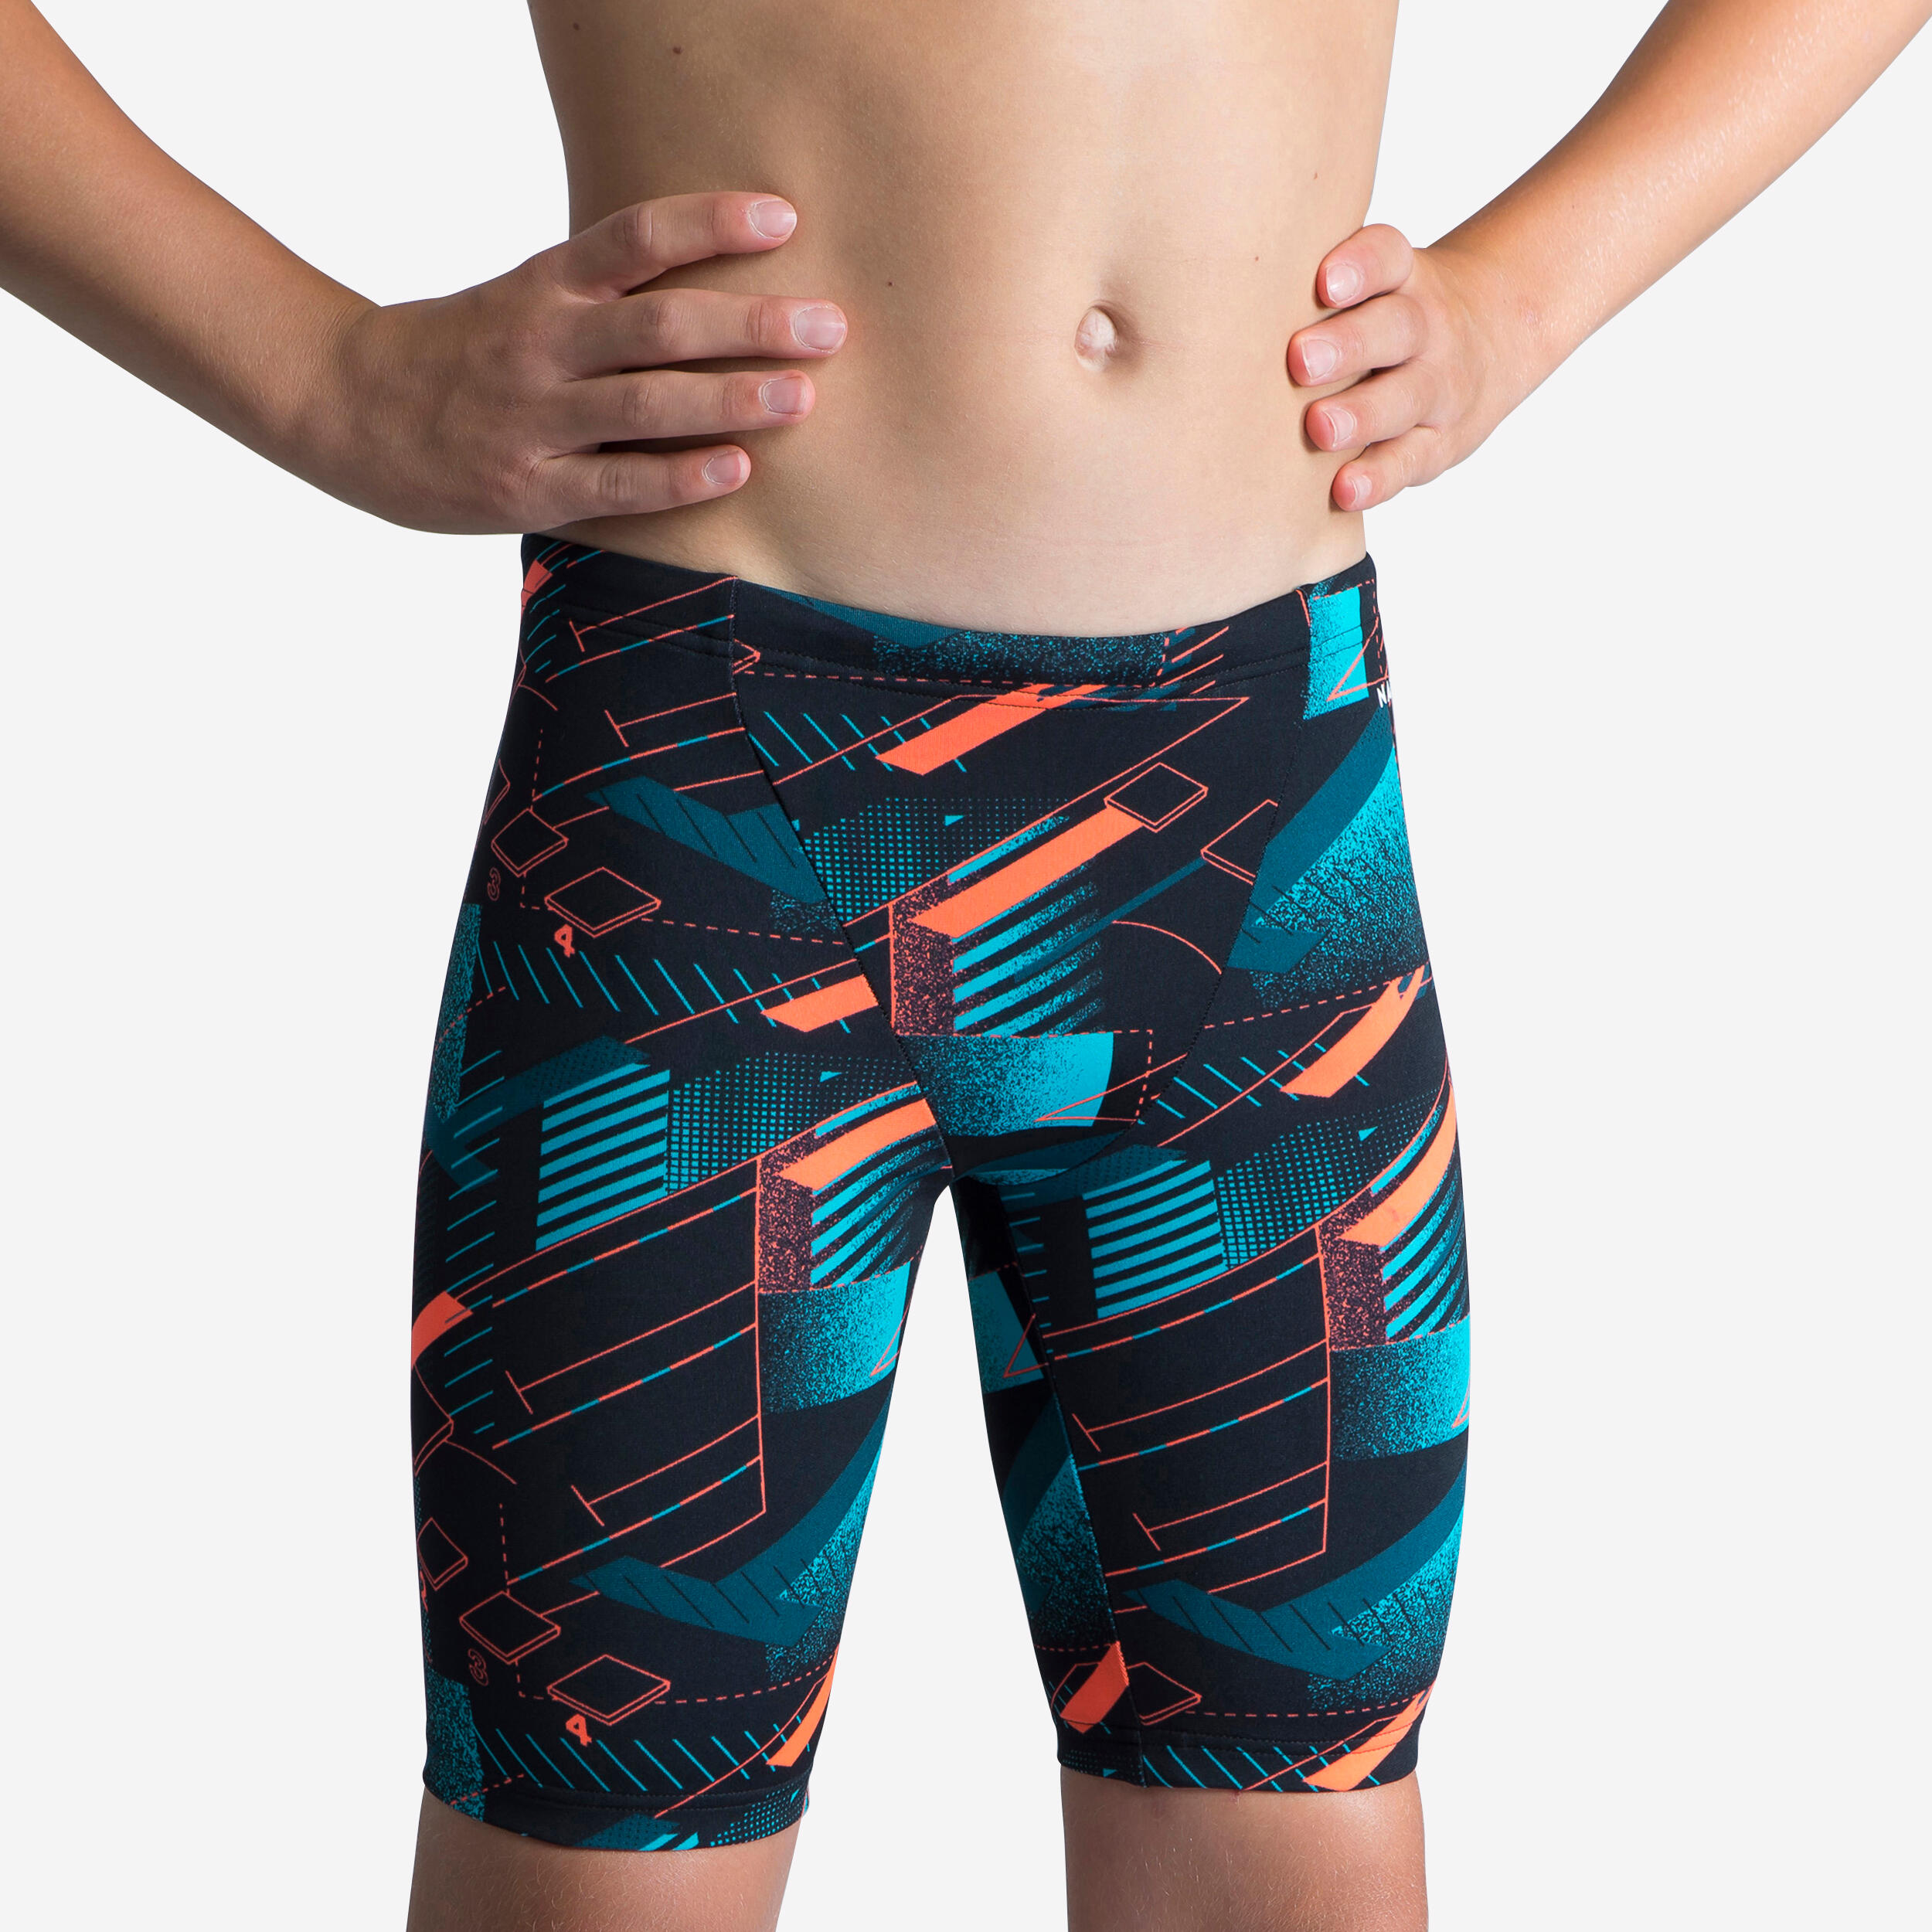 Boys’ Swimming Jammer Fitib Black / Bright Red / Turquoise 1/4